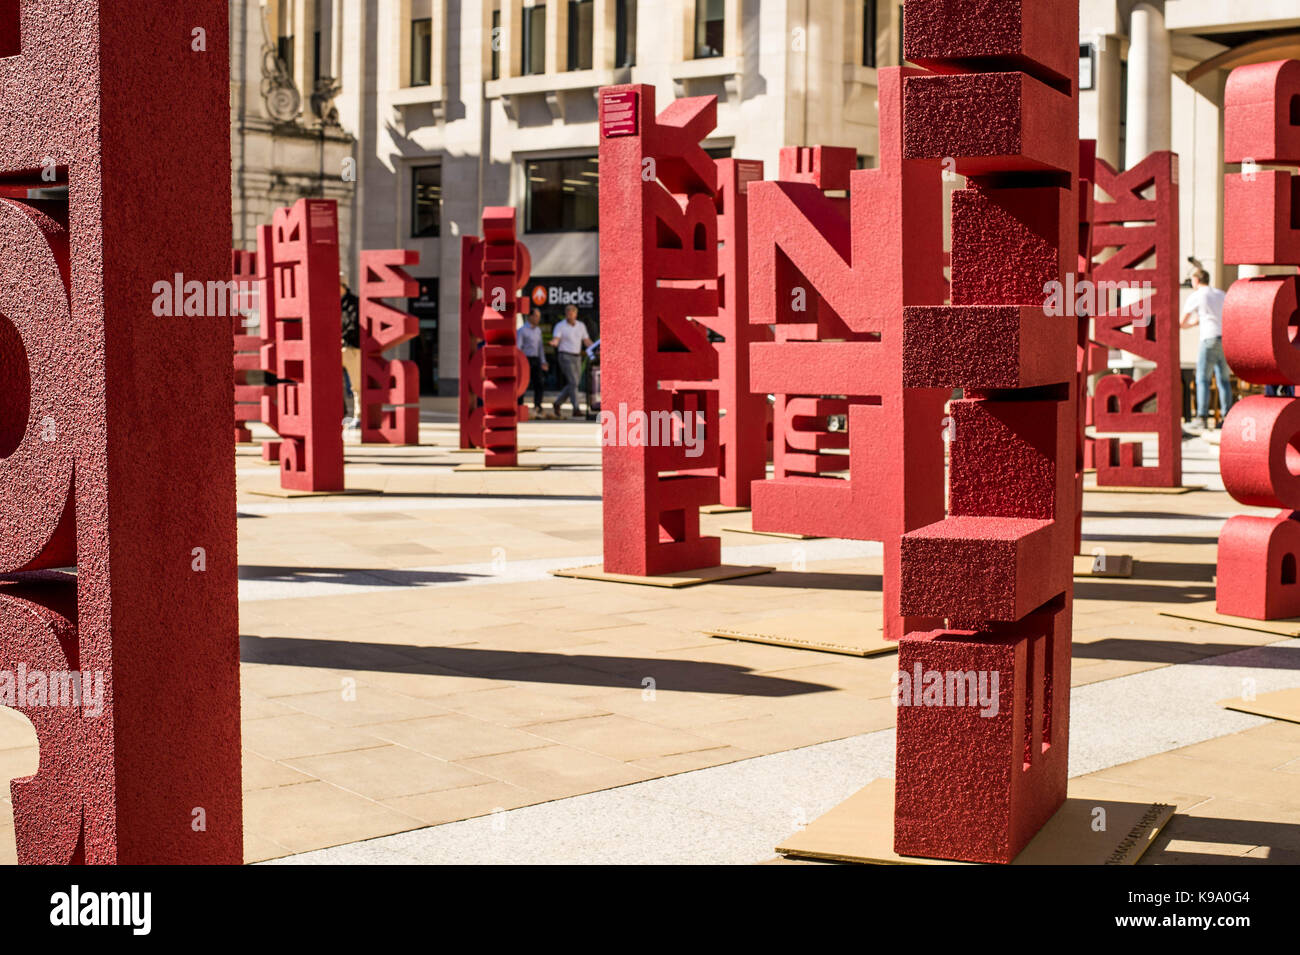 London, UK. 22nd Sep, 2017. Janssen Oncology have collaborated with nine blood cancer groups to raise awareness of the disease in Londons' Paternoster Square. Installing 104 three dimensional sculpures, designed by Paul Cocksedge, each representing a patient diagnosed with blood cancer everyday. Each of the pieces symbolises an individual with blood cancer. London, Paternoster Square, September 2017 Credit: Whitebox Media/Alamy Live News Stock Photo